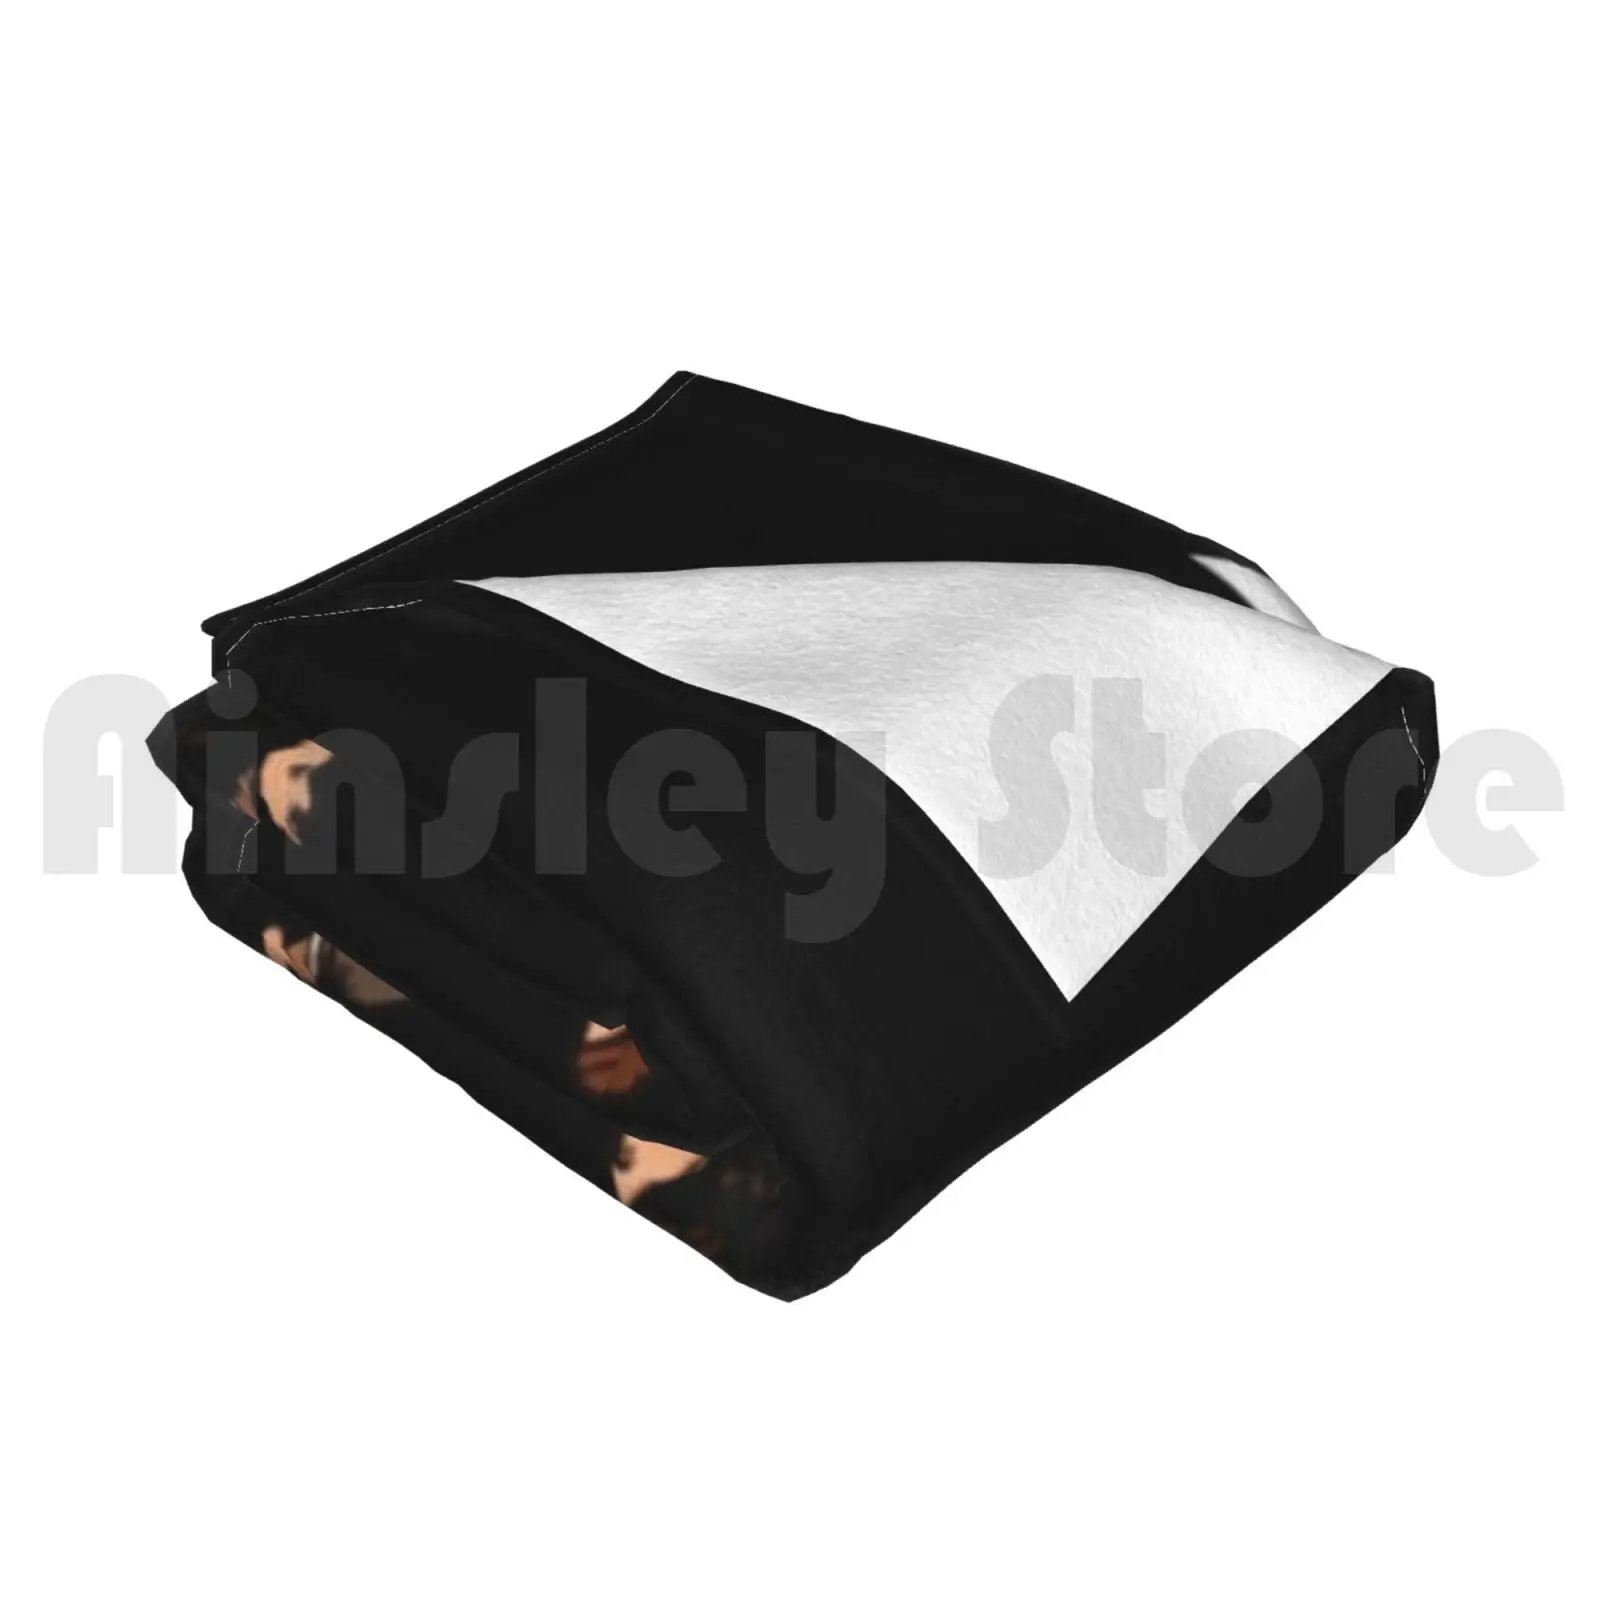 The Cross Blanket For Sofa Bed Travel Road Album Abbey Beatle Music images - 6